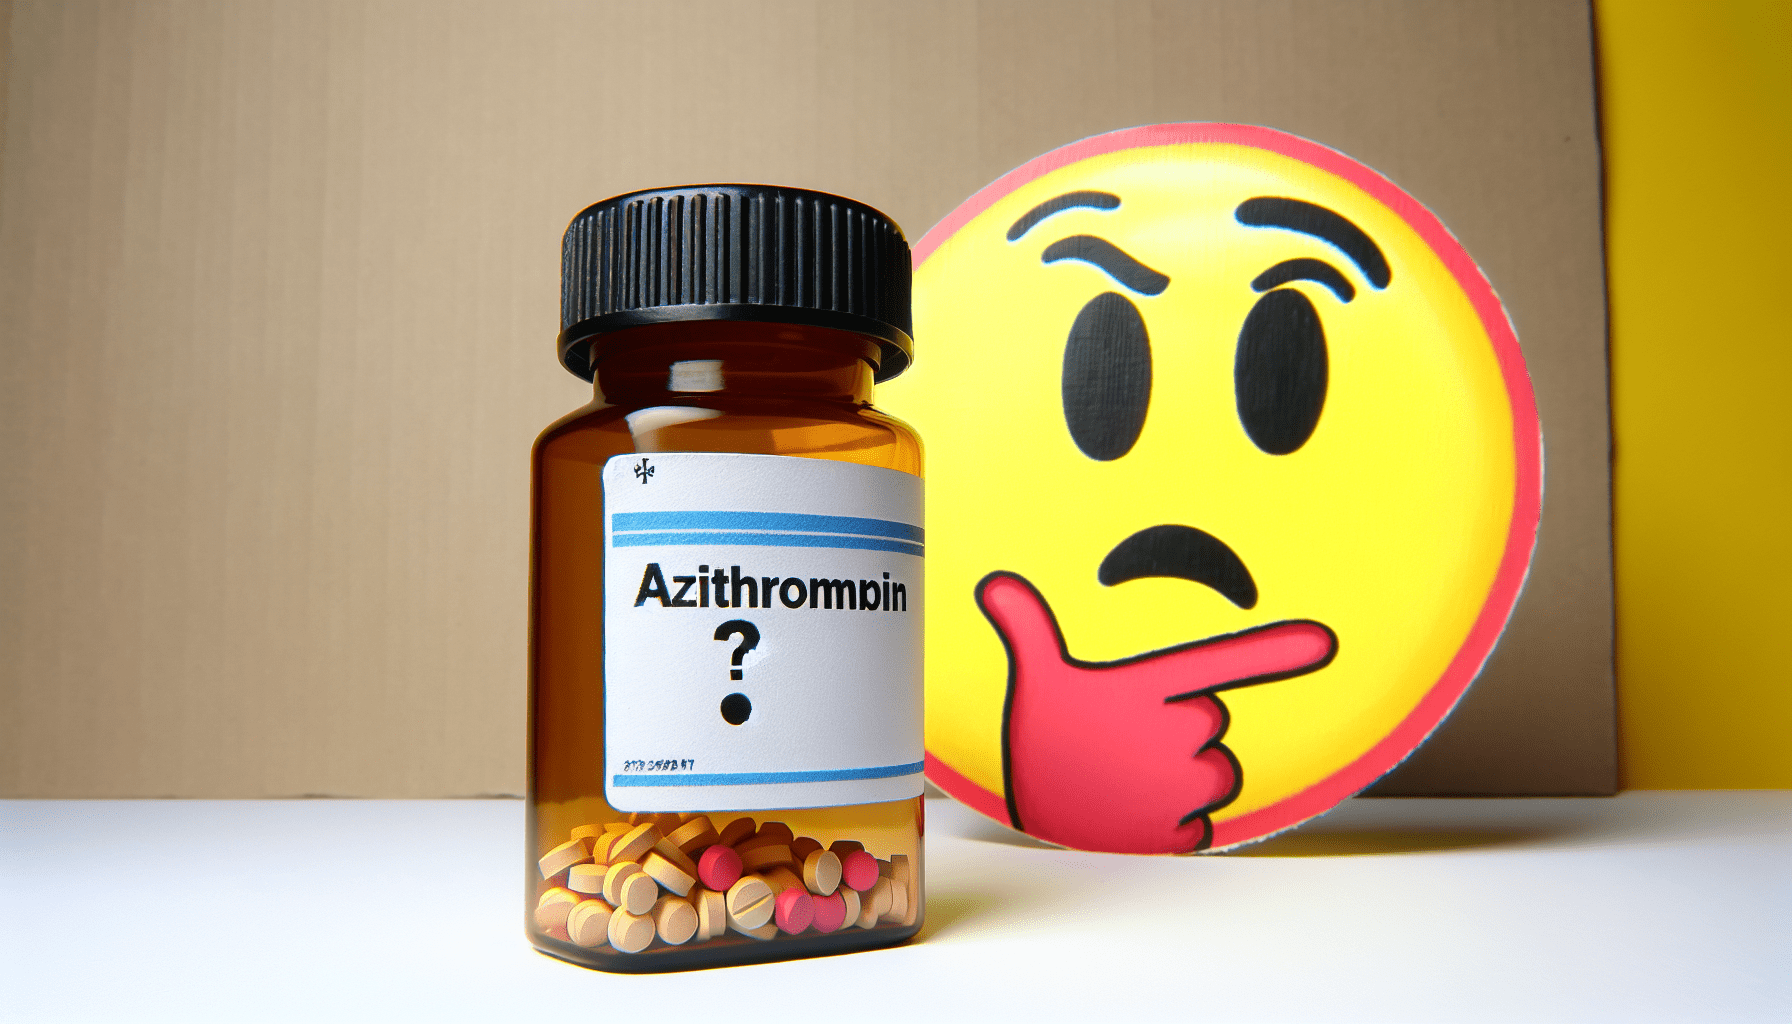 Why Is Azithromycin Not Working For Me?